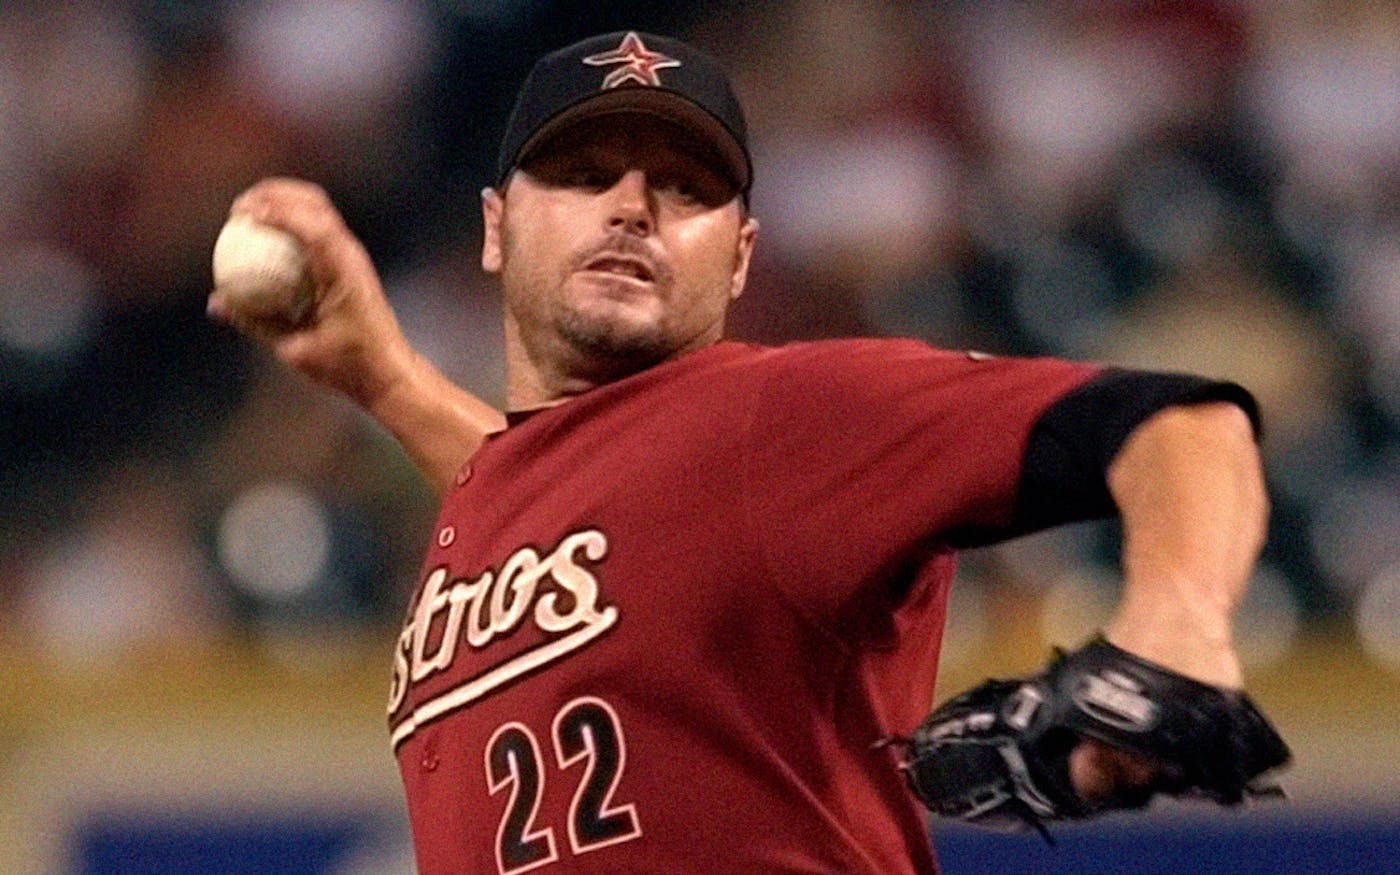 Is Roger Clemens the greatest baseball player not inducted into the  Baseball Hall of Fame? - Quora